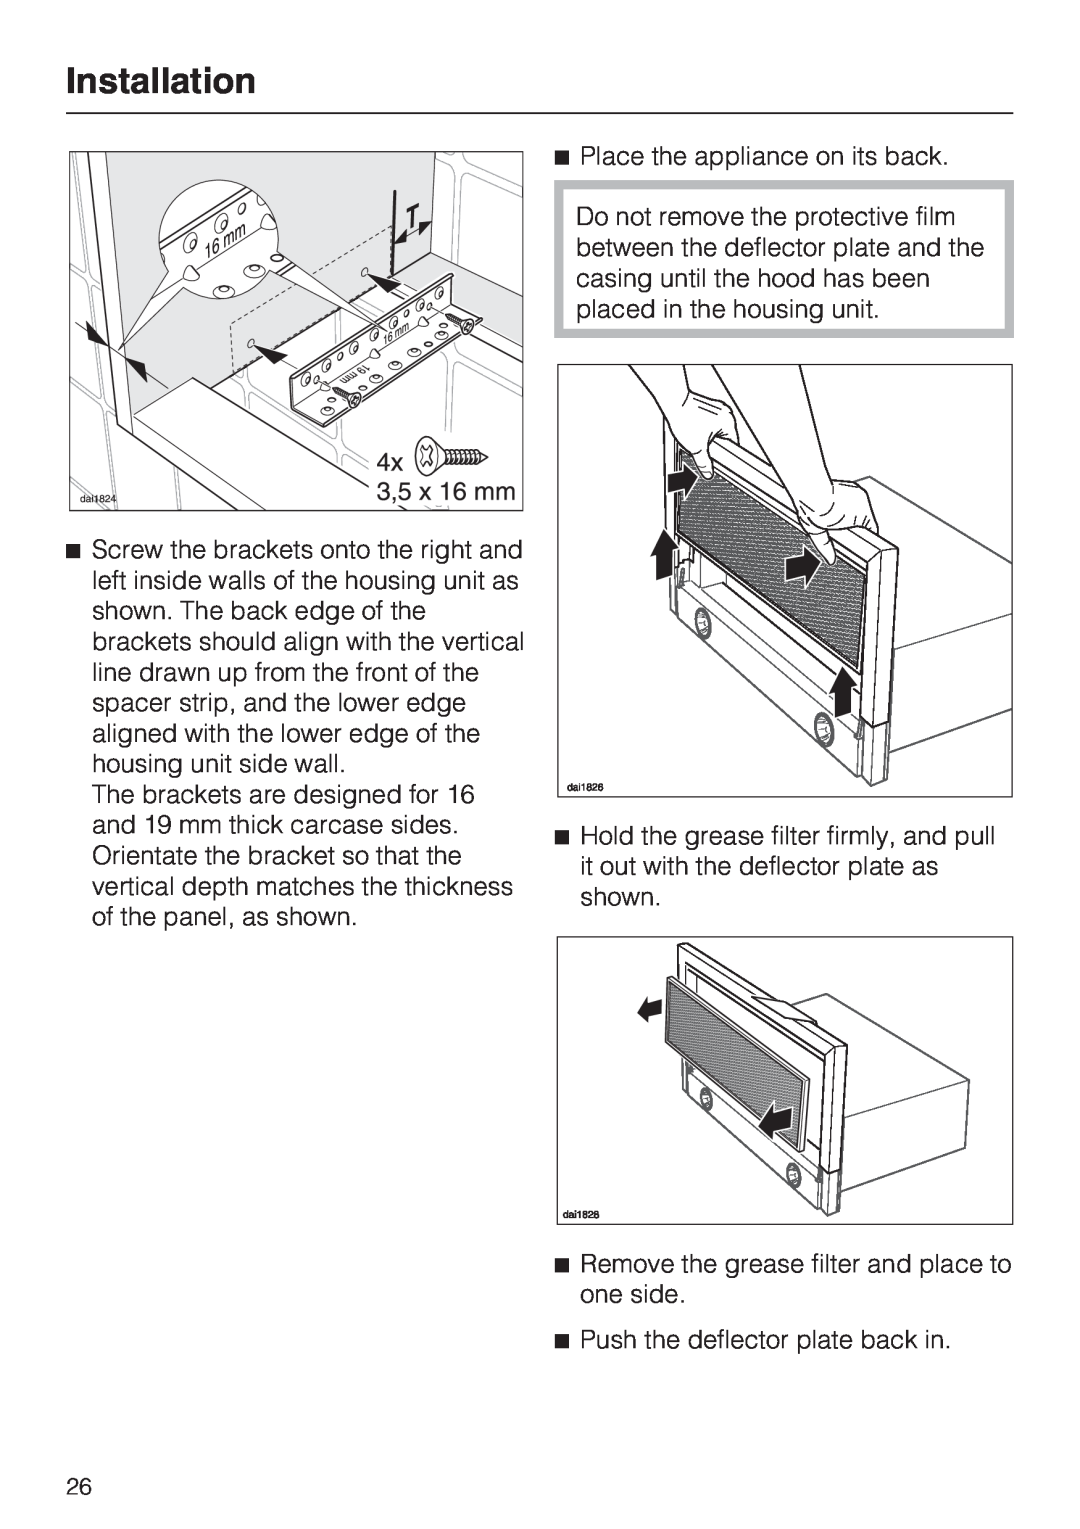 Miele DA 3190 EXT, DA 3160 EXT installation instructions Installation, Place the appliance on its back 